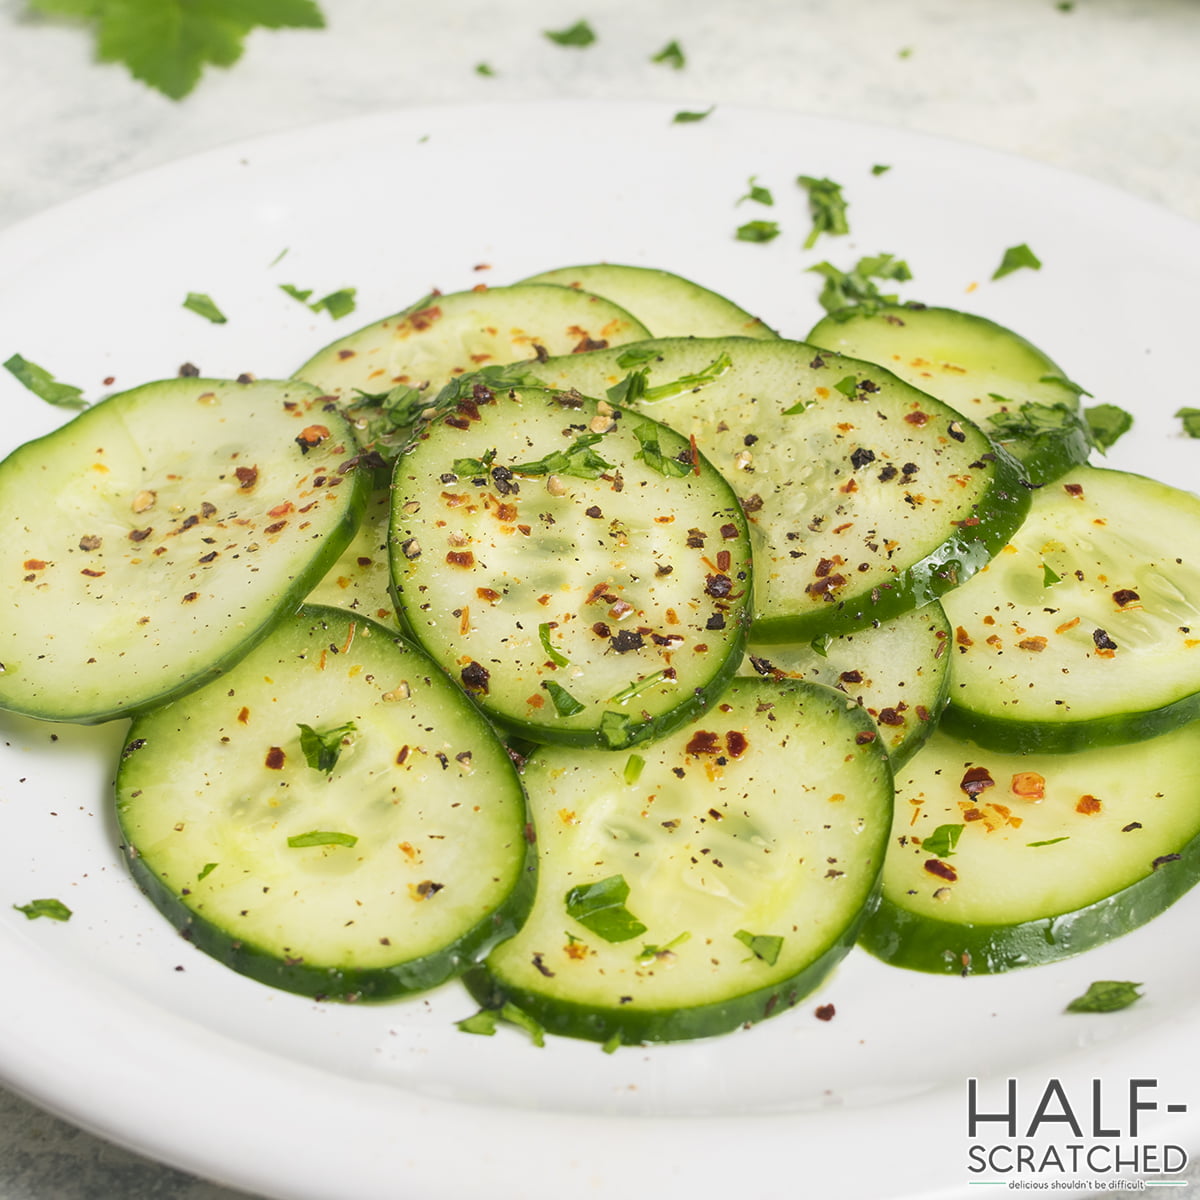 lose-up view of seasoned cucumber slices